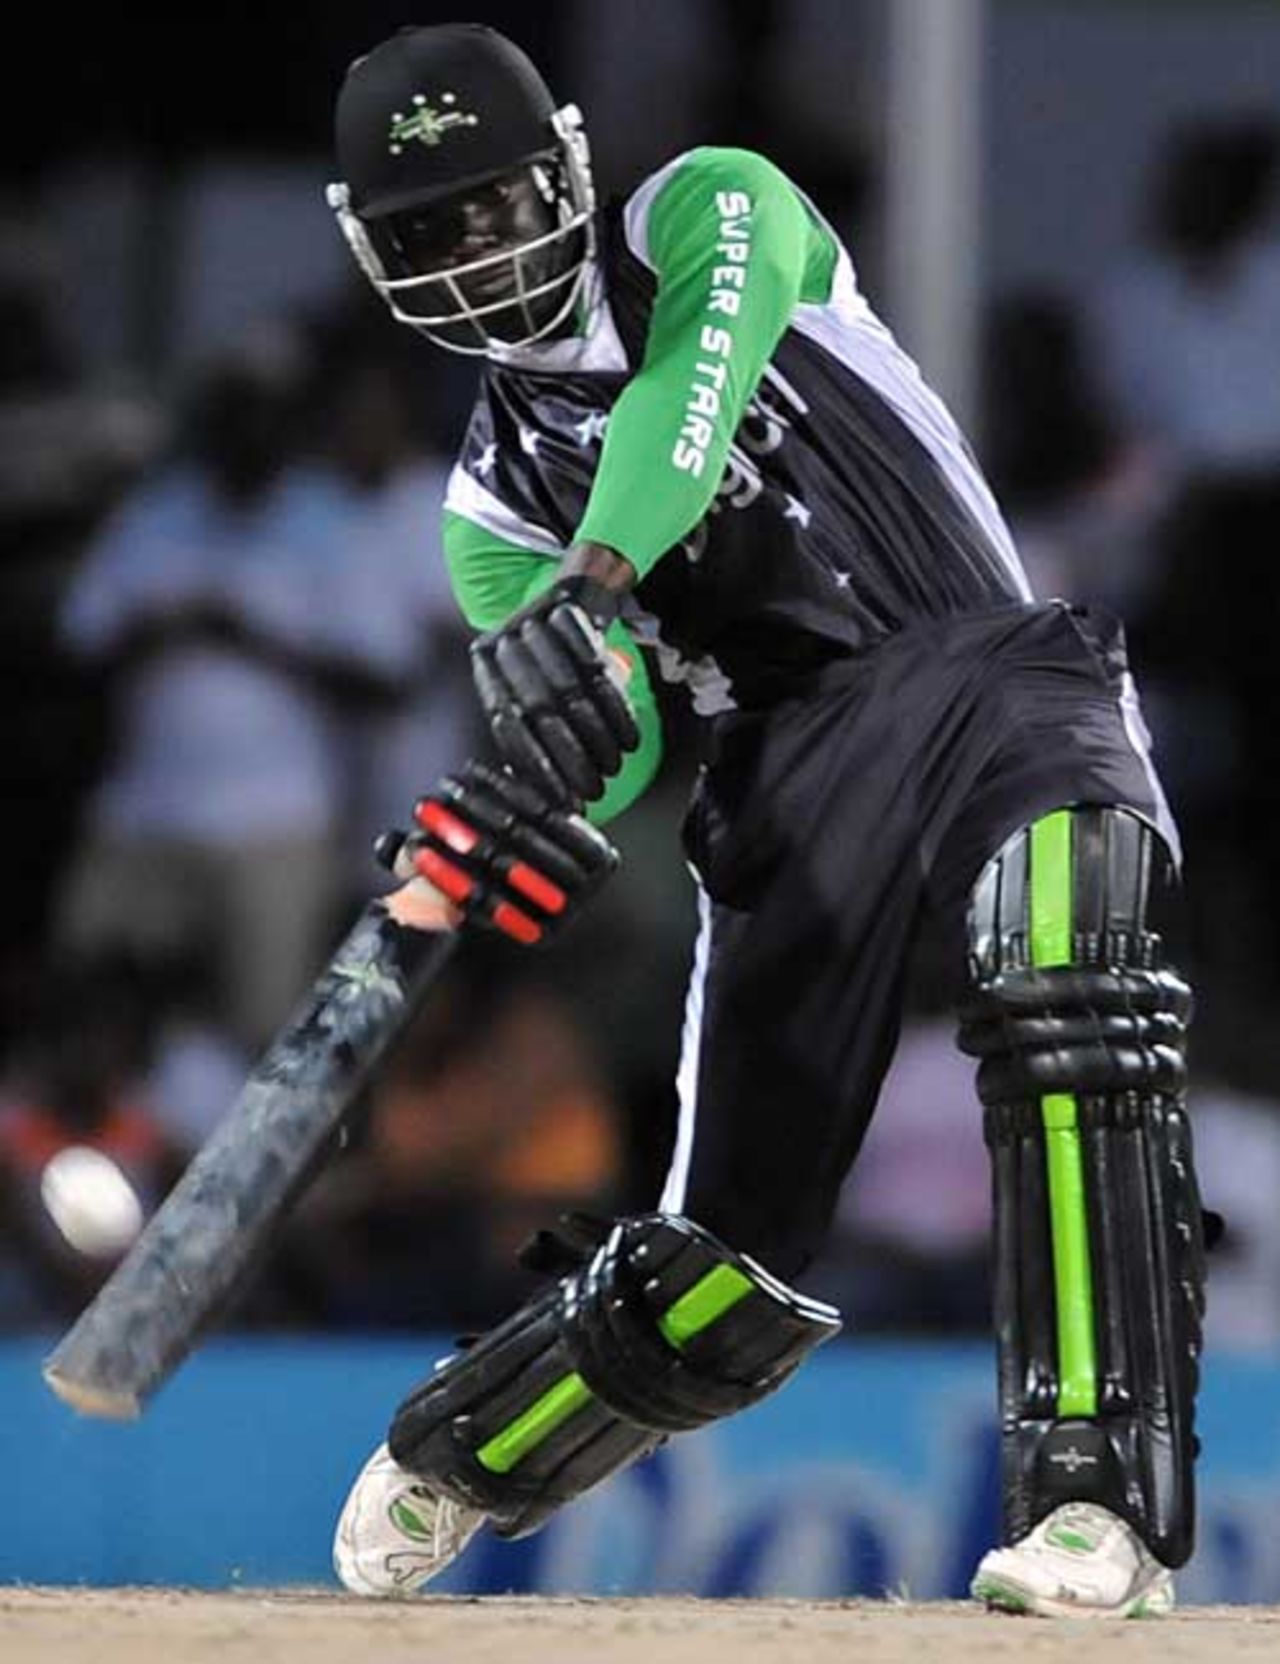 Andre Fletcher connects to launch one of his sixes, Stanford Superstars v Middlesex, Antigua, October 30, 2008